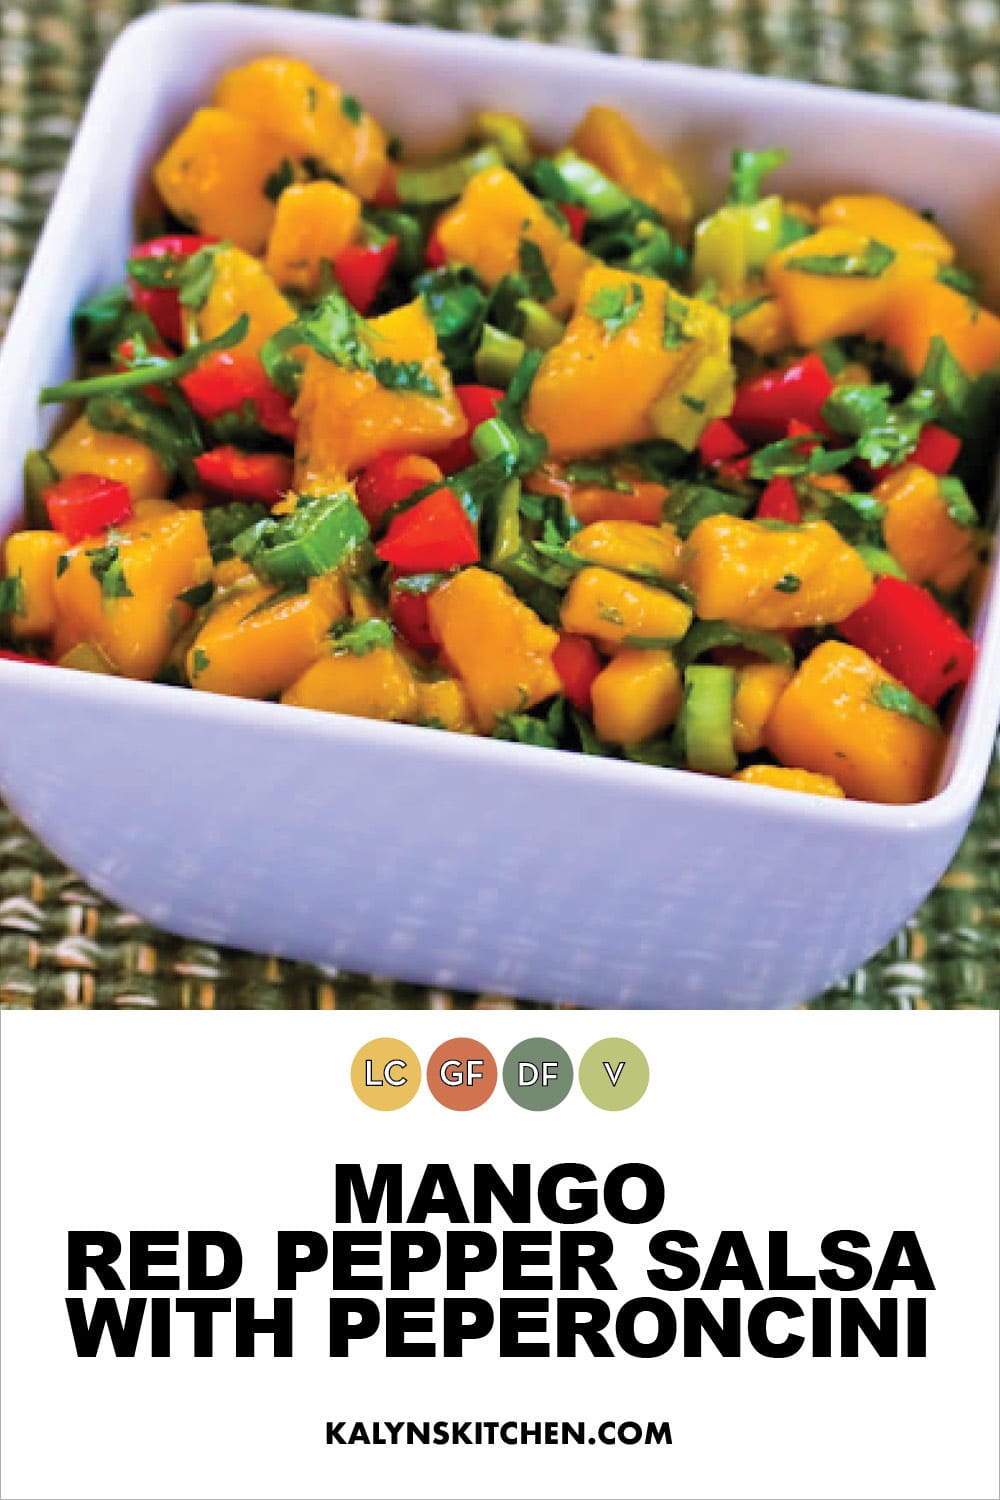 Pinterest image of Mango Red Pepper Salsa with Peperoncini